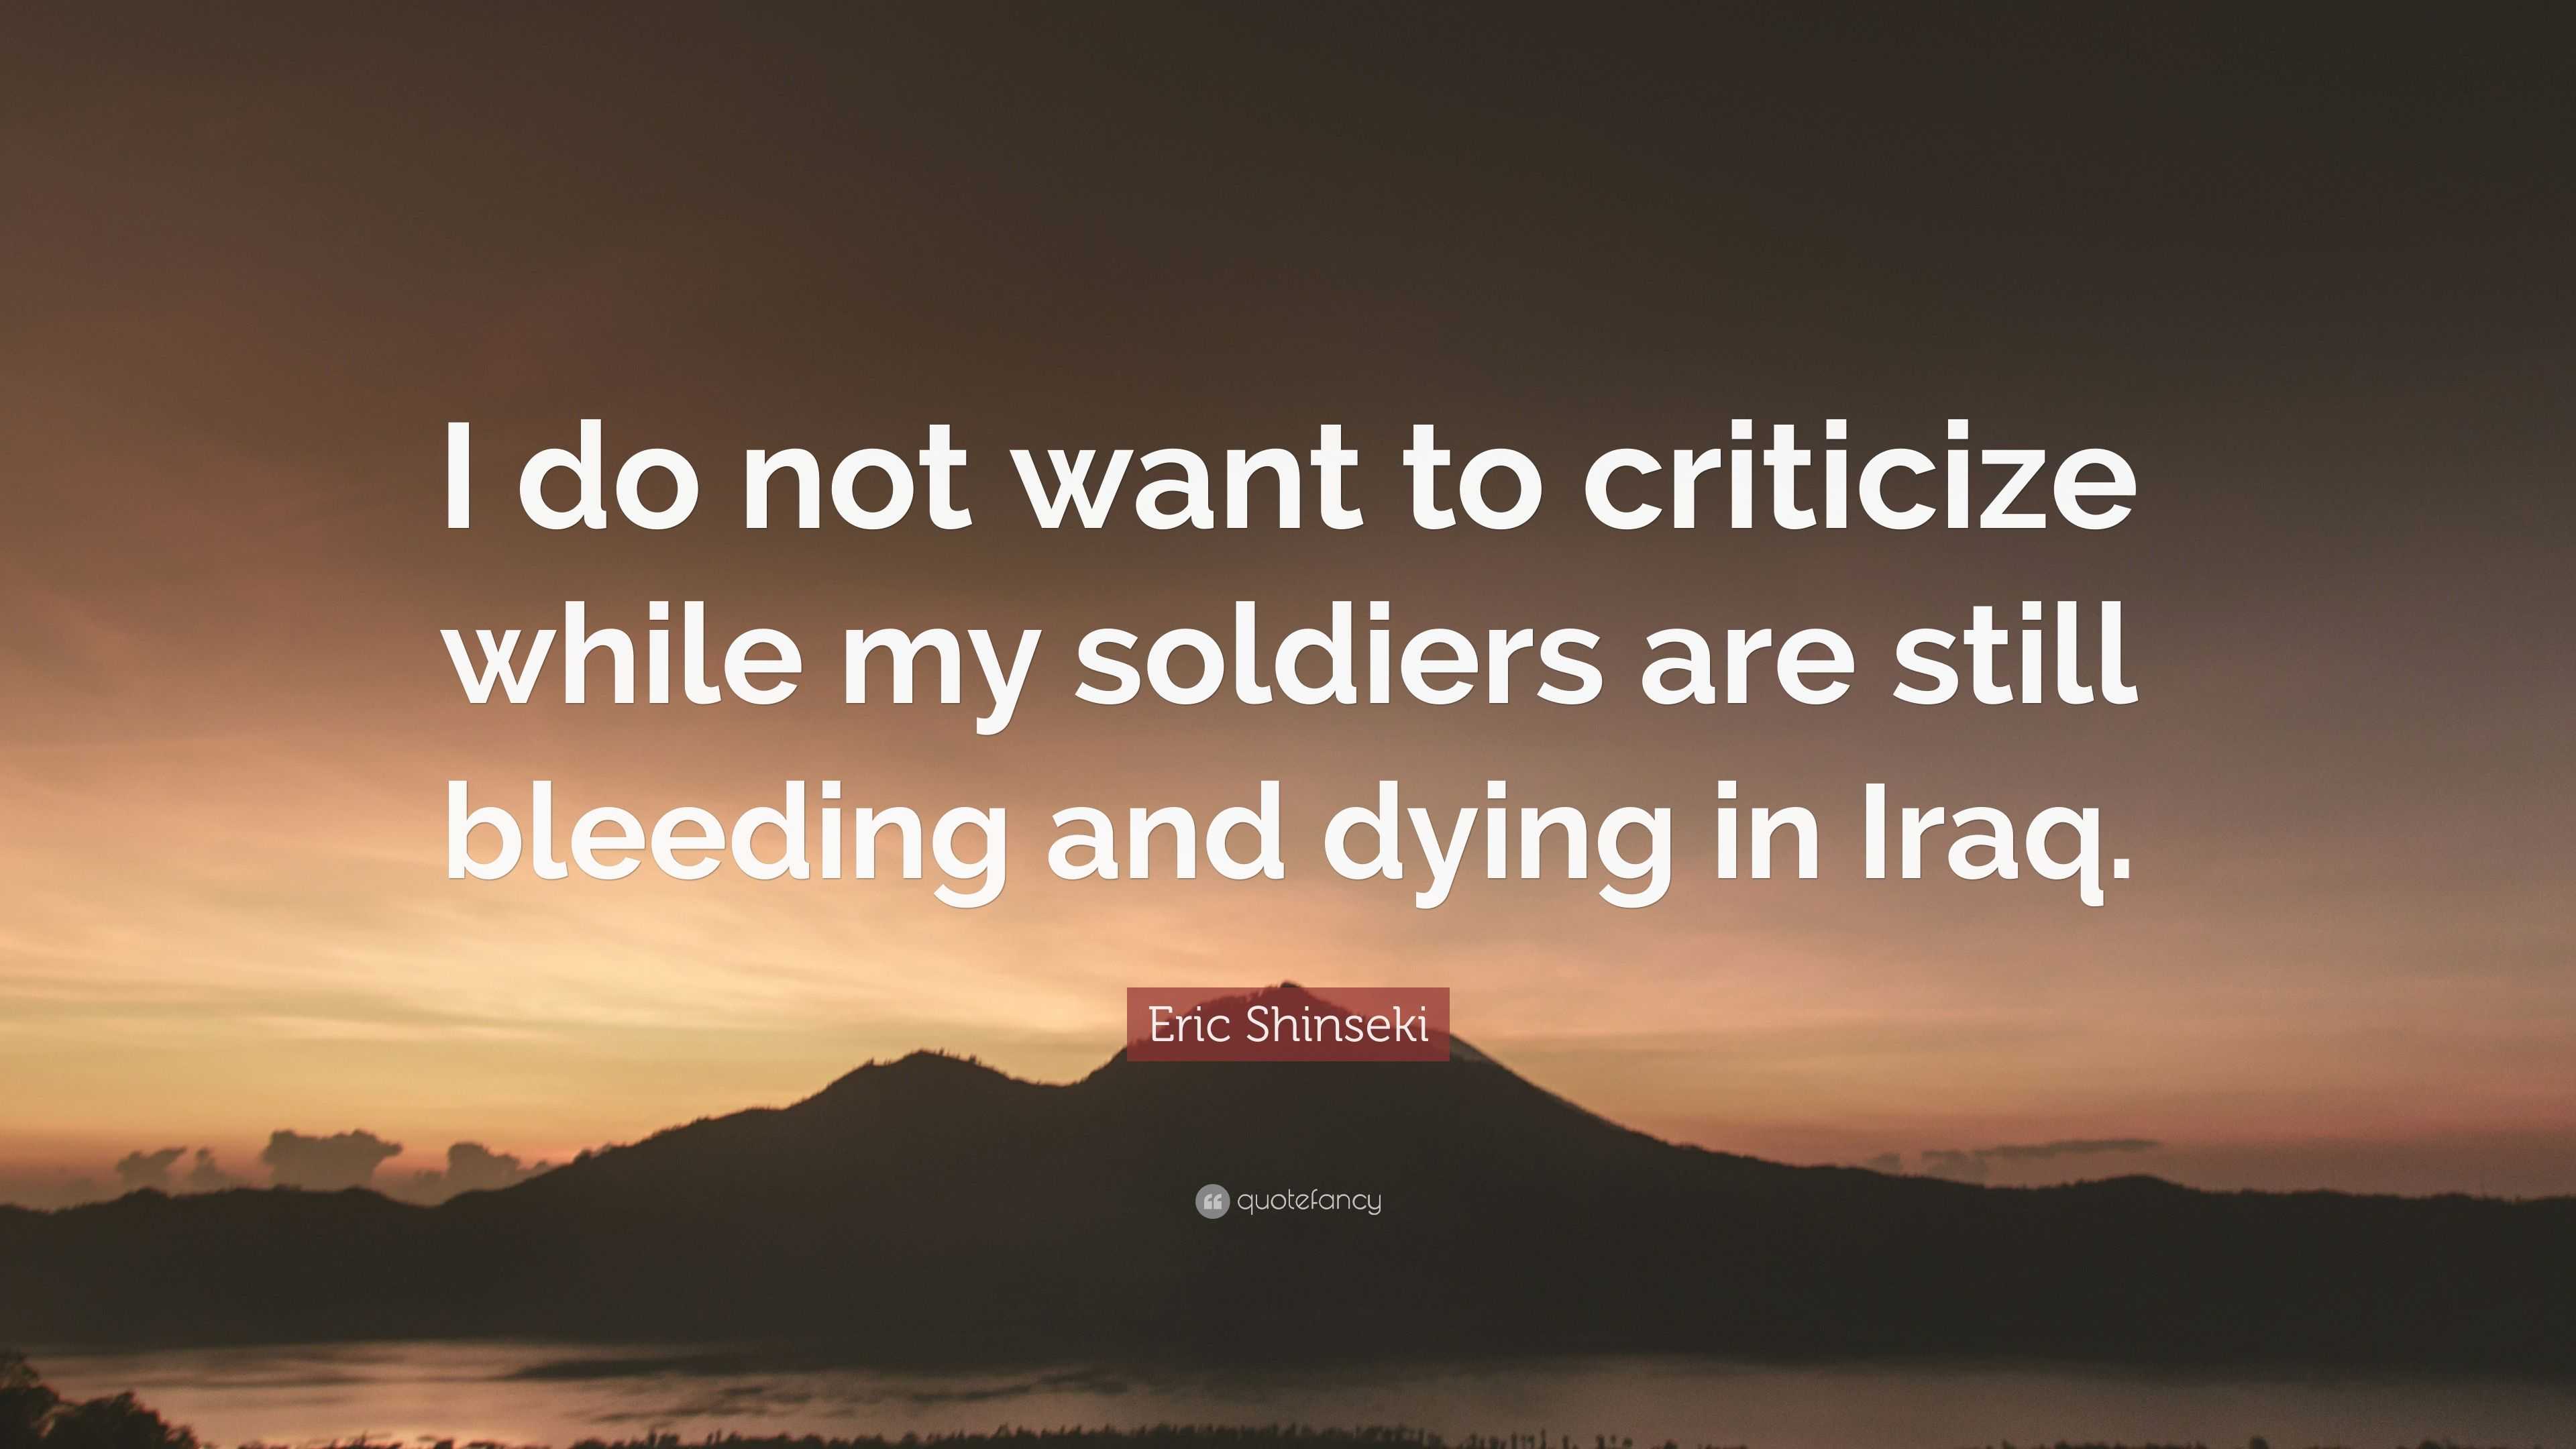 Eric Shinseki Quote: “I do not want to criticize while my soldiers are ...